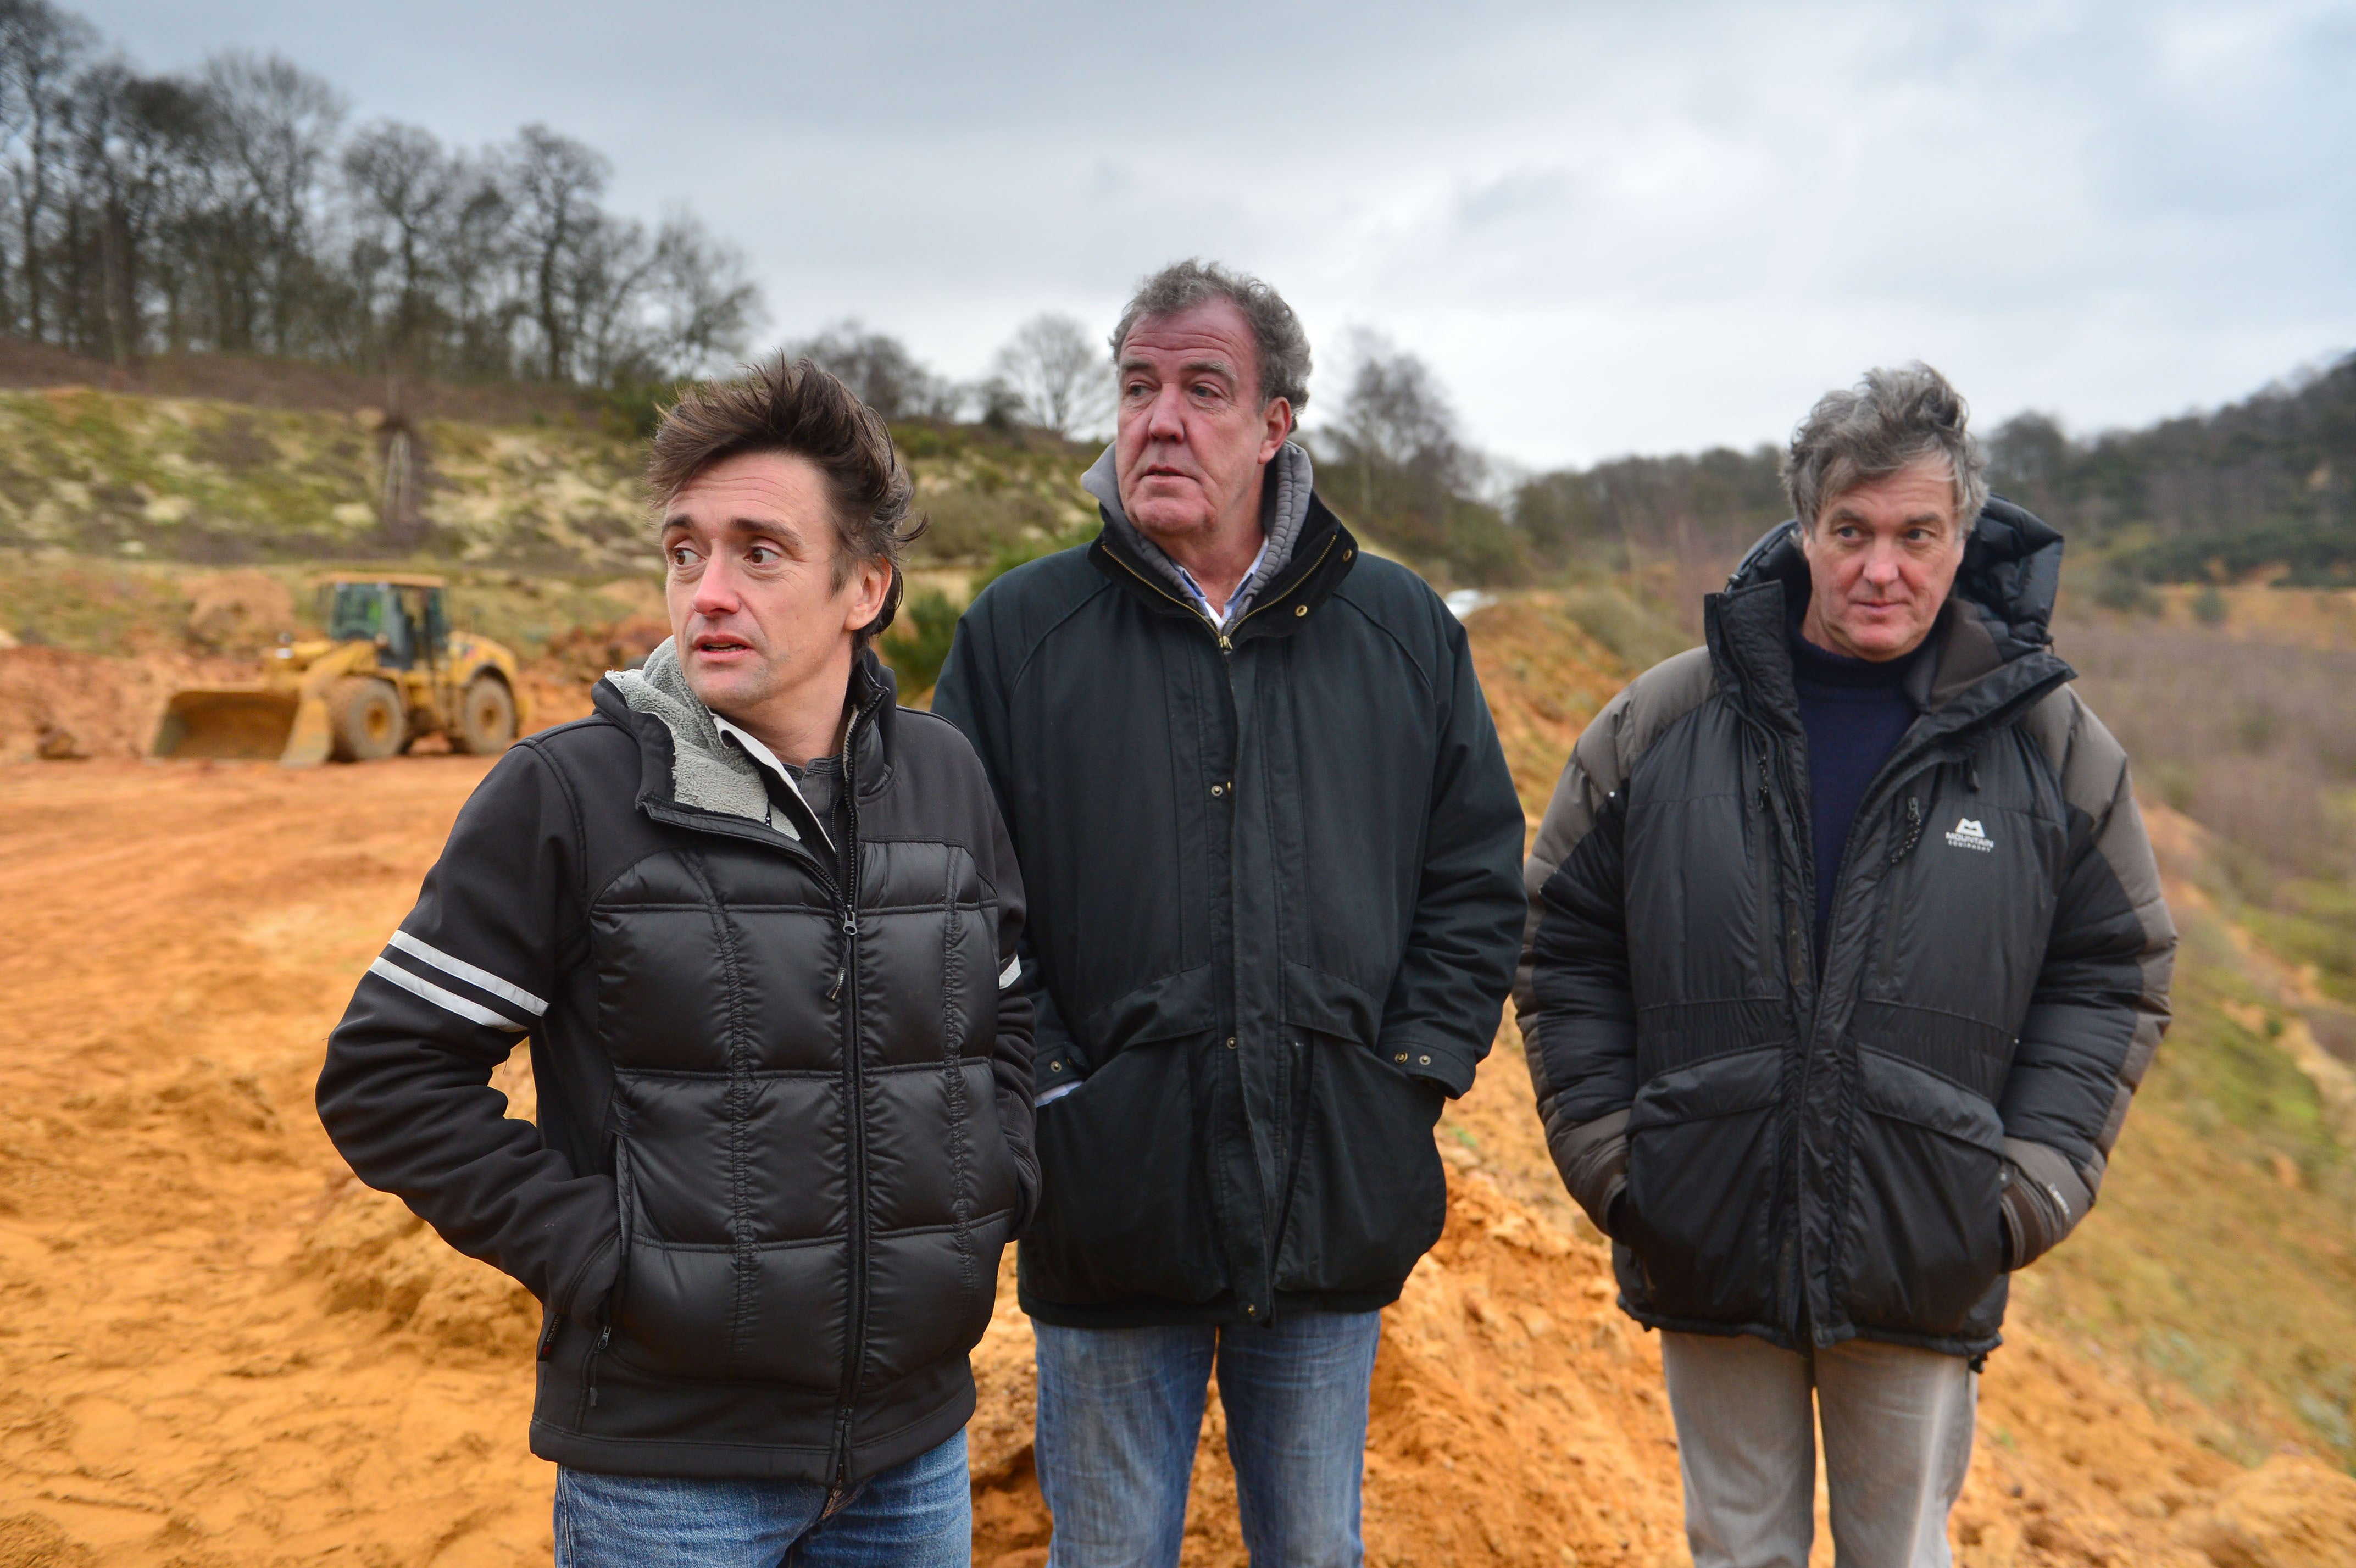 Hammond presented Top Gear alongside Jeremy Clarkson and James May